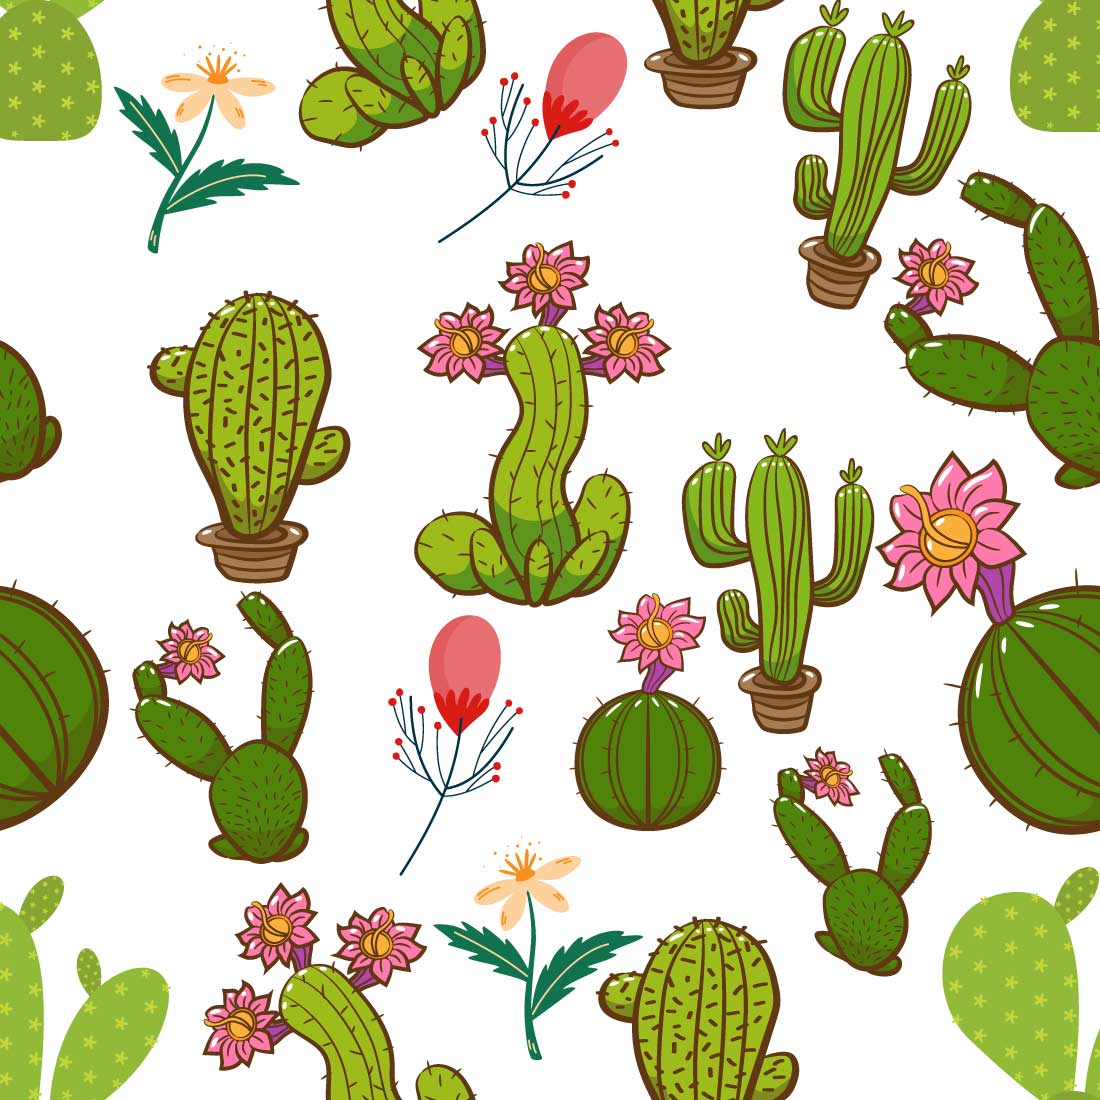 pattern design in cactus with flowers1 24